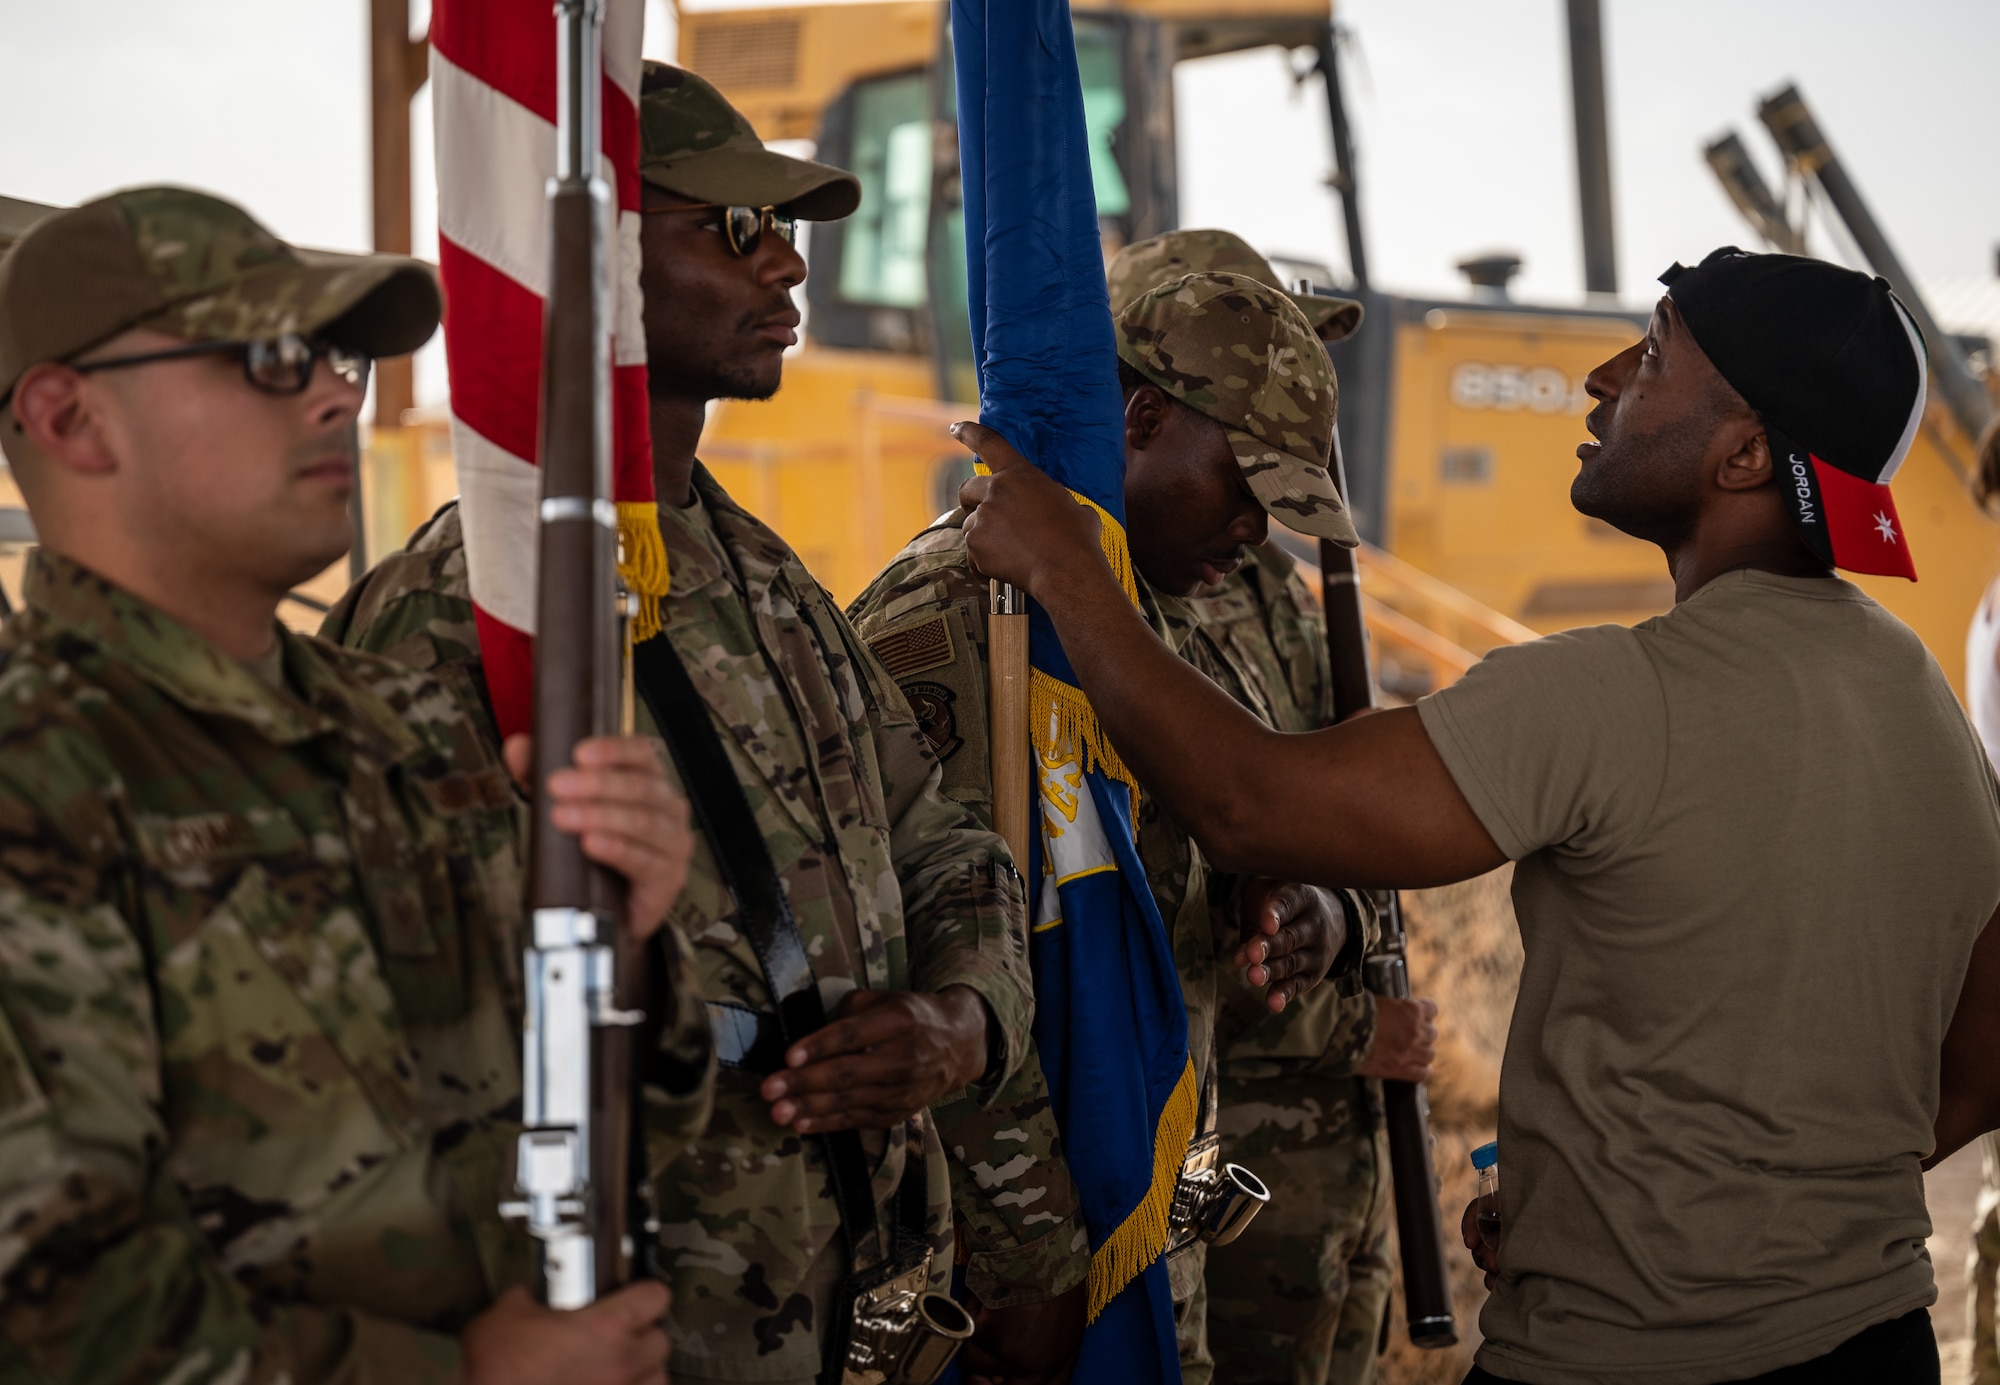 Technical Sgt. Jason Dixon, 332d Expeditionary Logistics Readiness Squadron aerial port superintendent and Base Honor Guard lead trainer, provides direction to BHG team members just before presenting the colors for an outdoor ceremony at an undisclosed location in Southwest Asia, May 27, 2022. The Honor Guard provides military ceremonial support and dignified transfer support when called upon. (U.S. Air Force photo by Master Sgt. Christopher Parr)